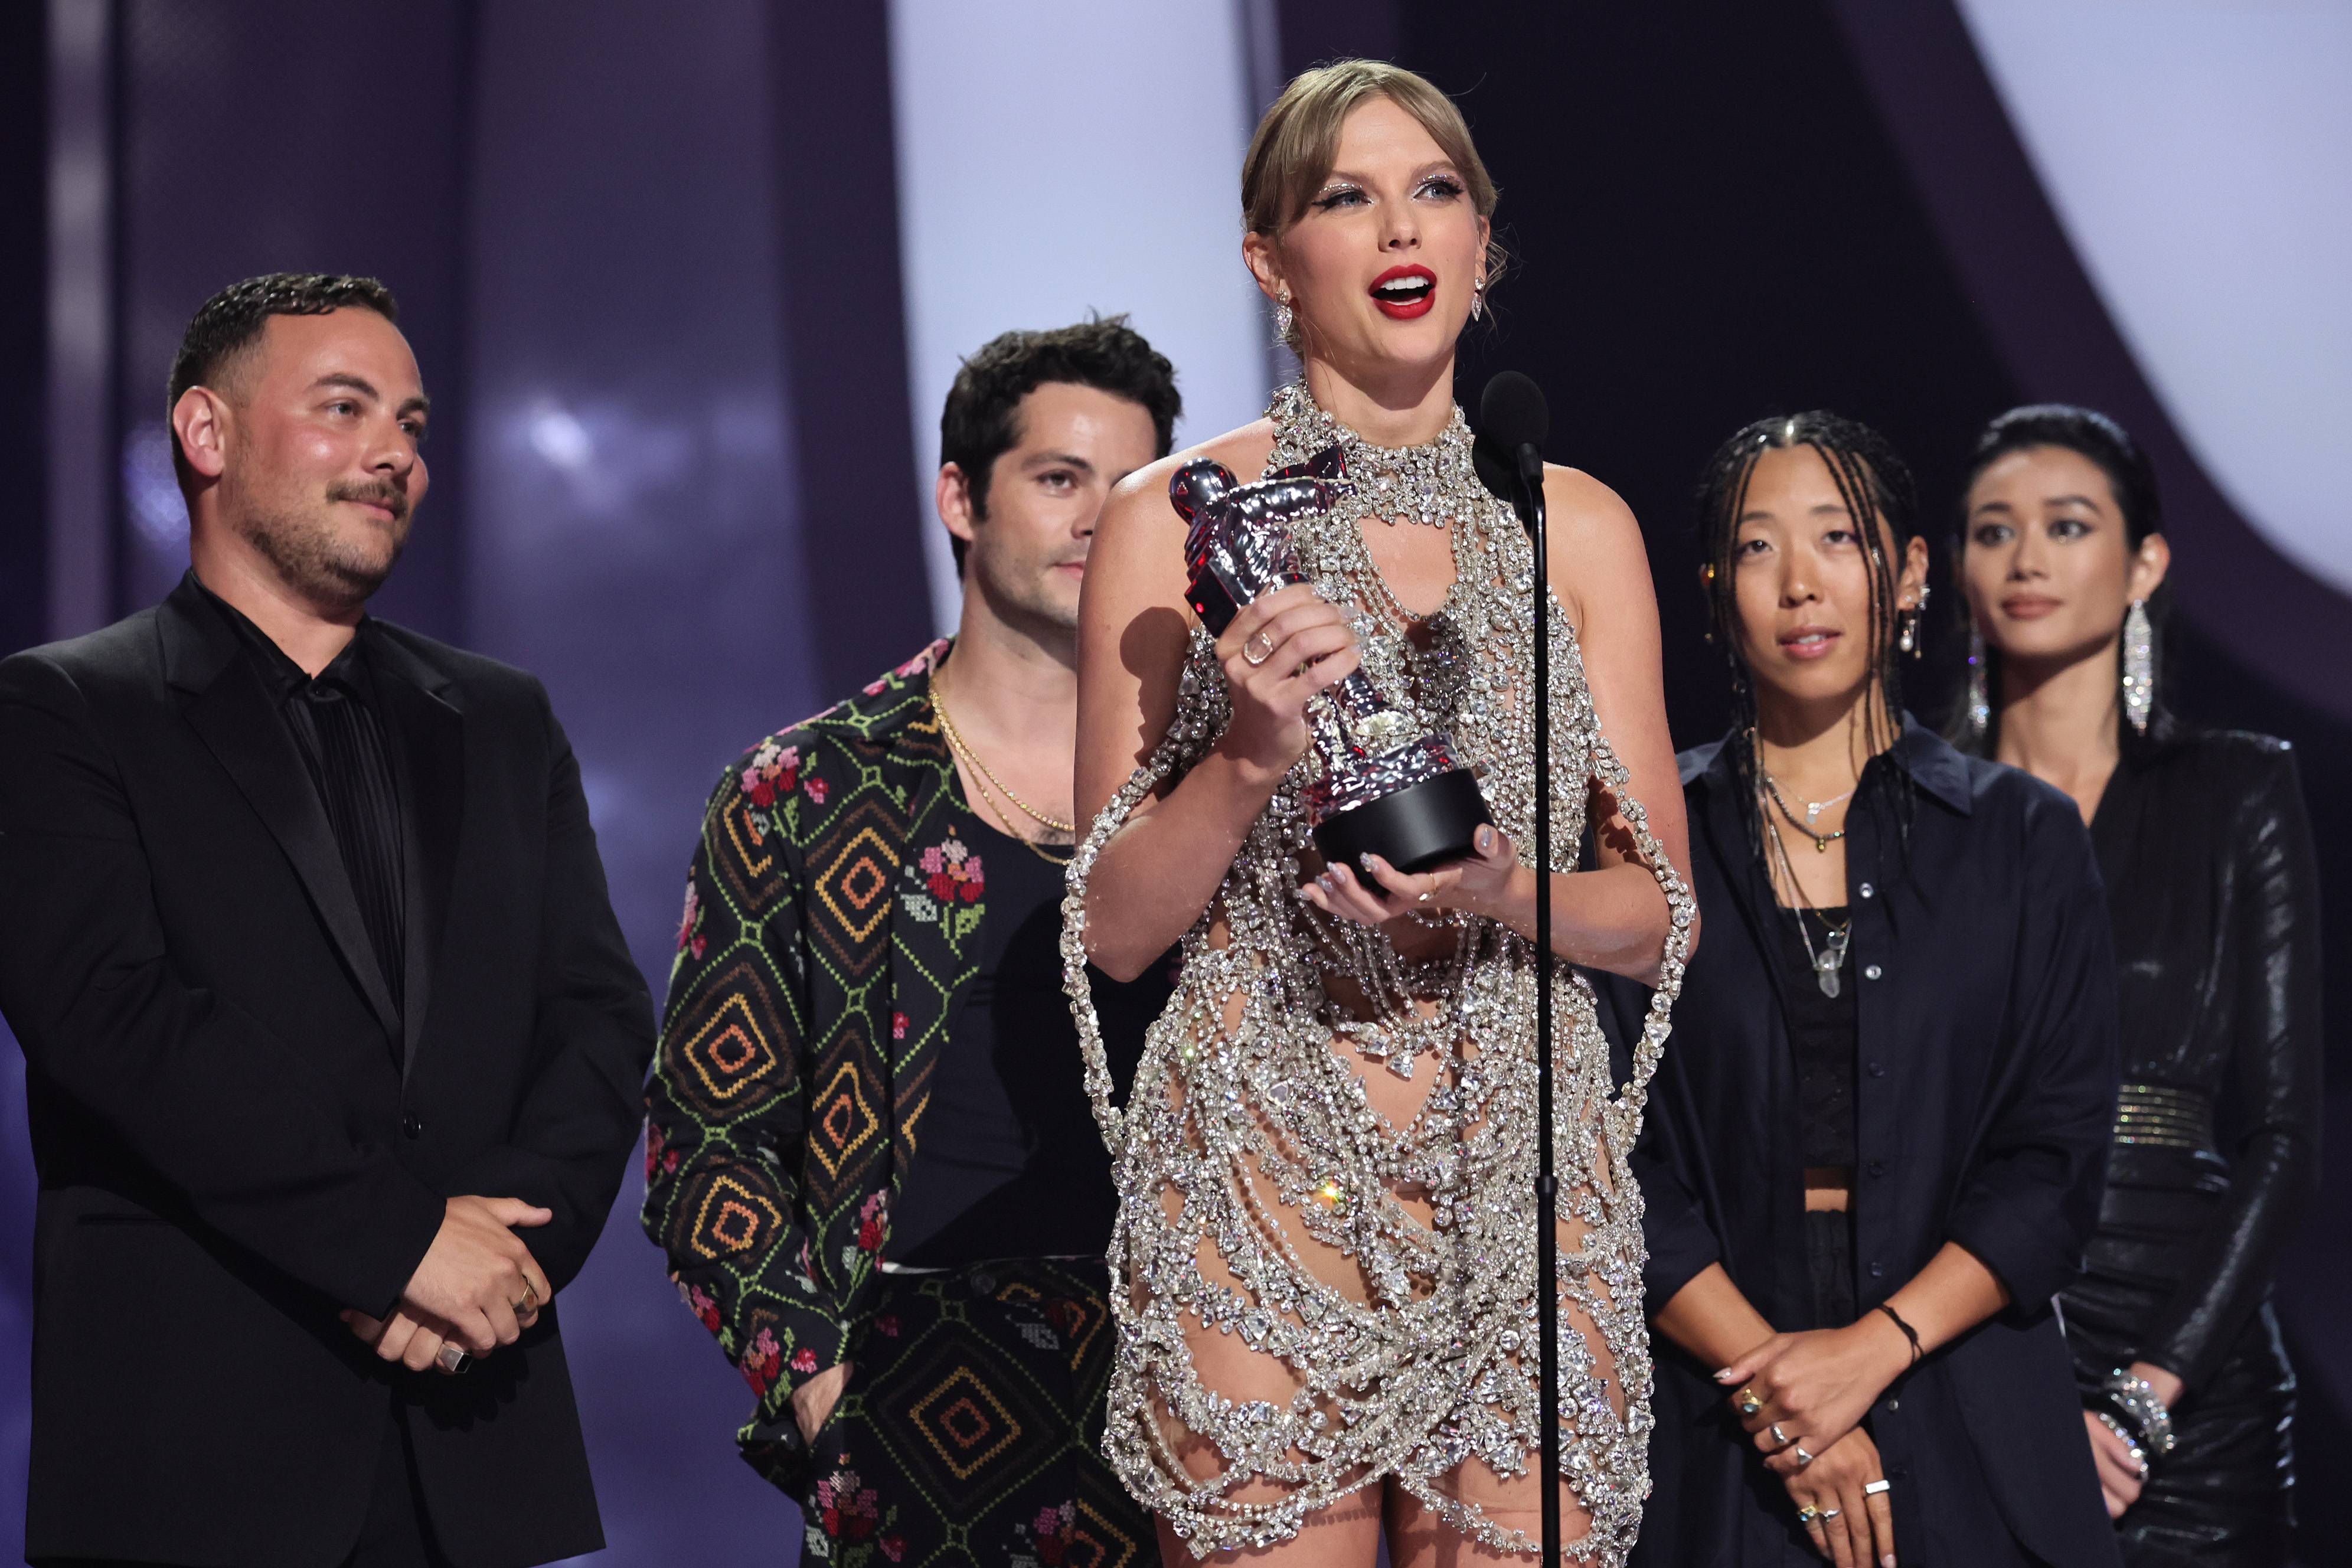 Taylor Swift accepts the VMA for Video of the Year at the 2022 MTV VMAs.